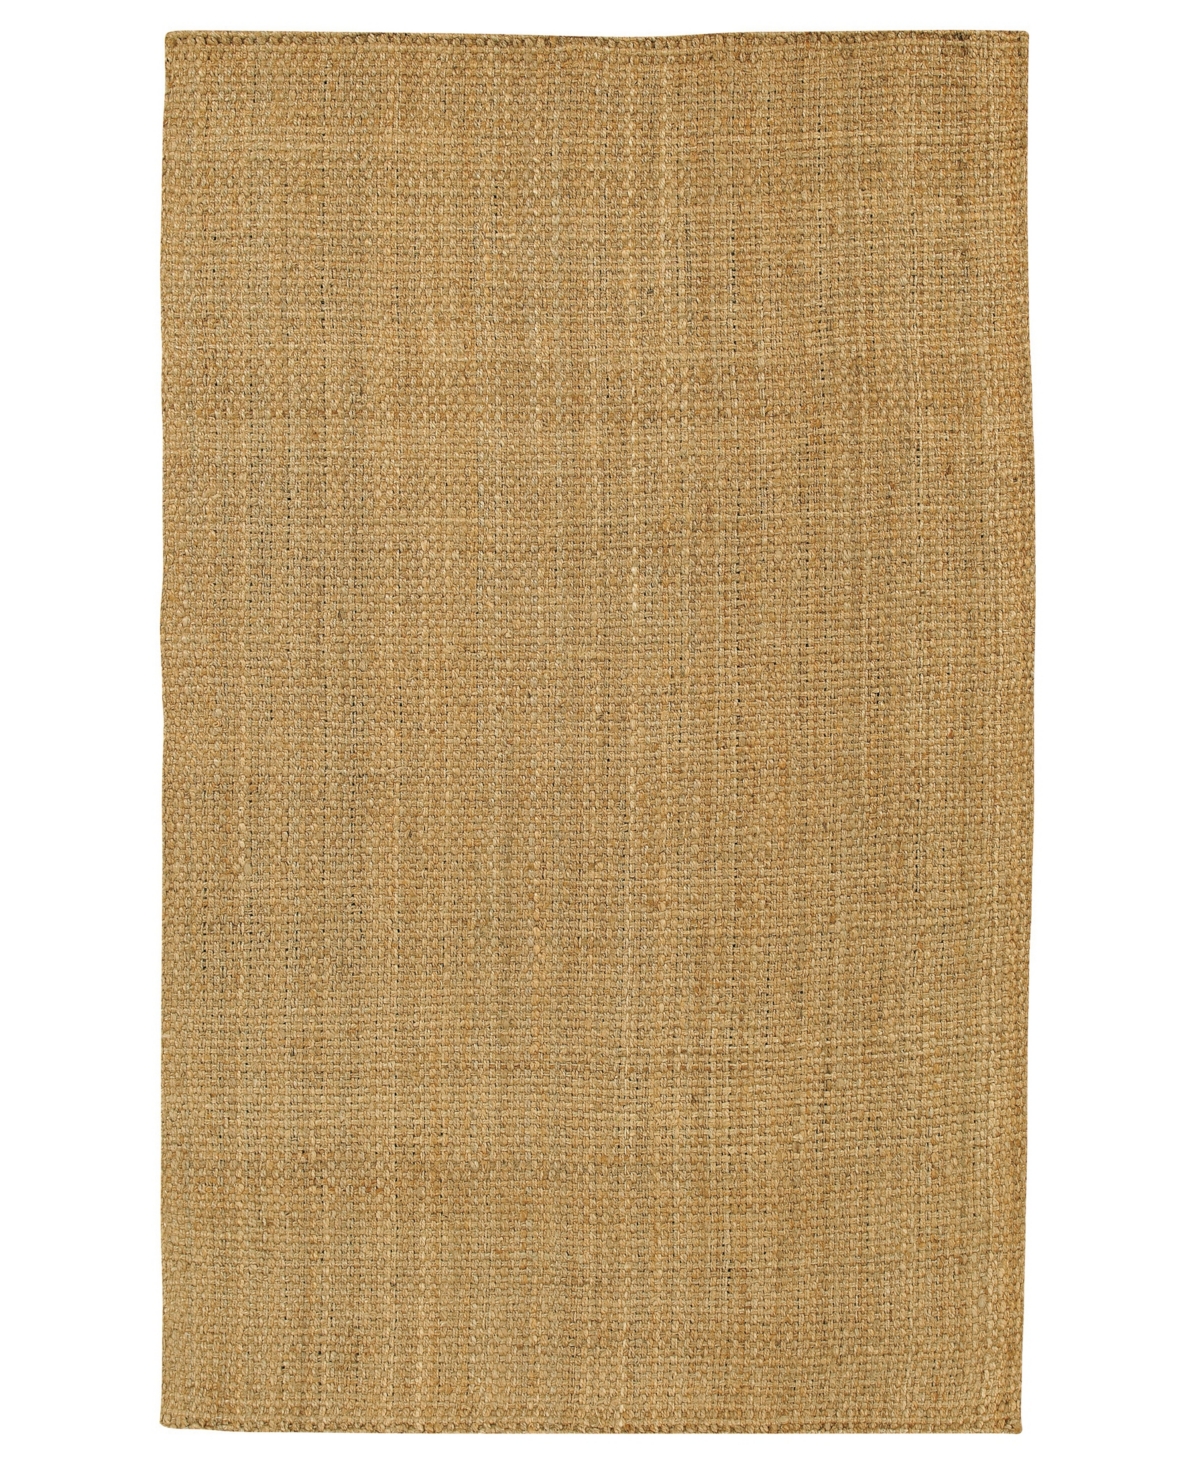 Surya Area Rug, Natural Living Js-2 Brown 8' x 10' 6in